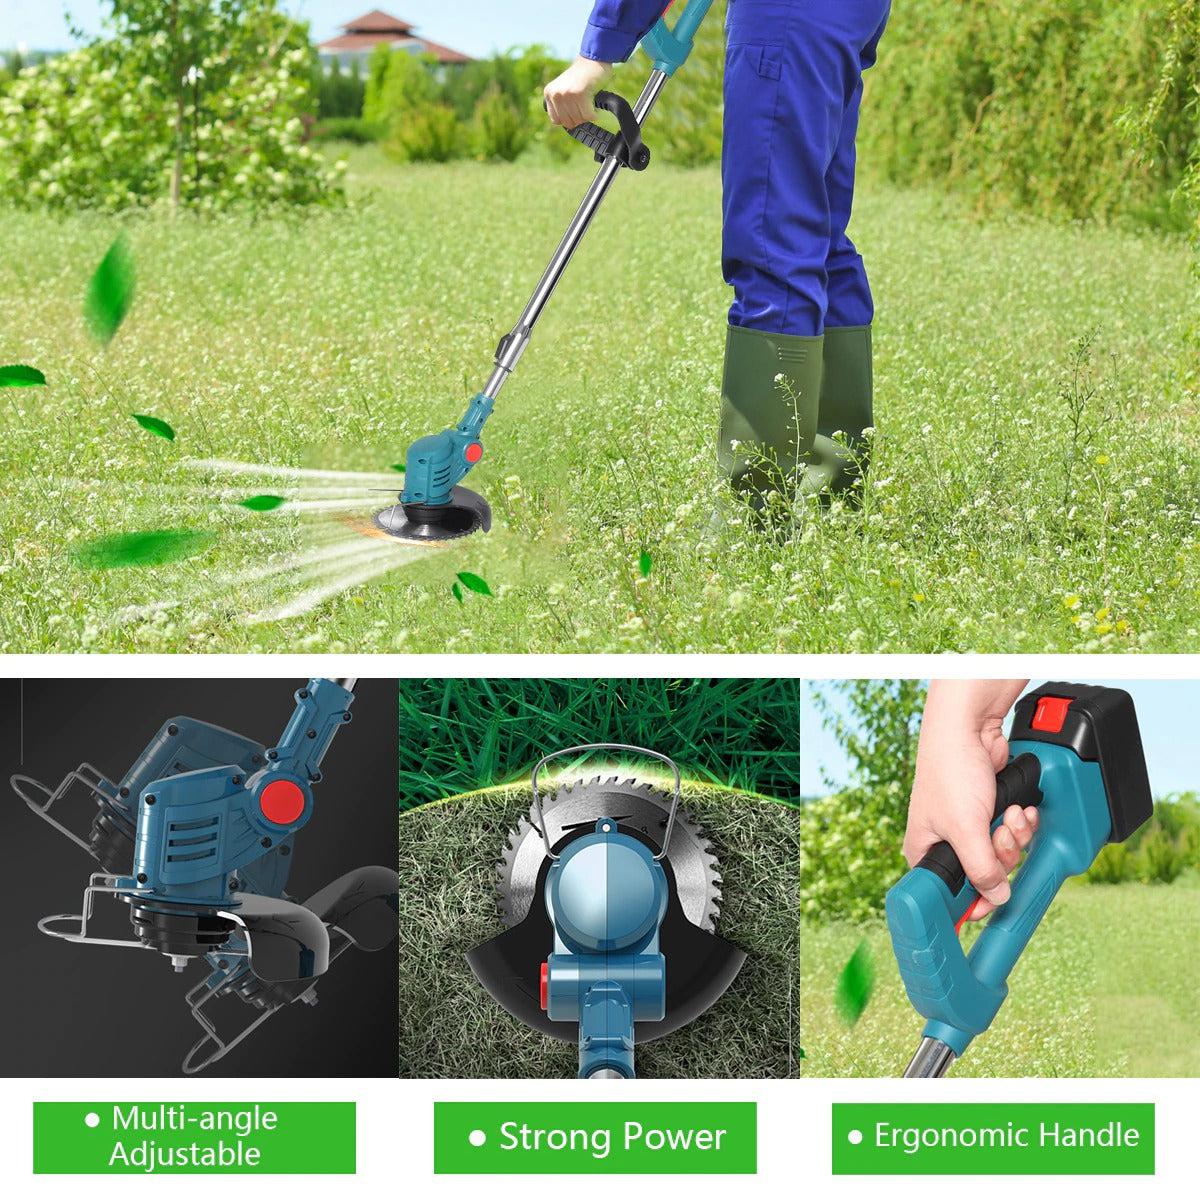 Electric Lawn Mower_Grass cutter_Grass Trimmer_Electric weed wacker_Lawn Trimmer_Cordless Grass trimmer_Electric Grass Trimmer_DIYlife-today